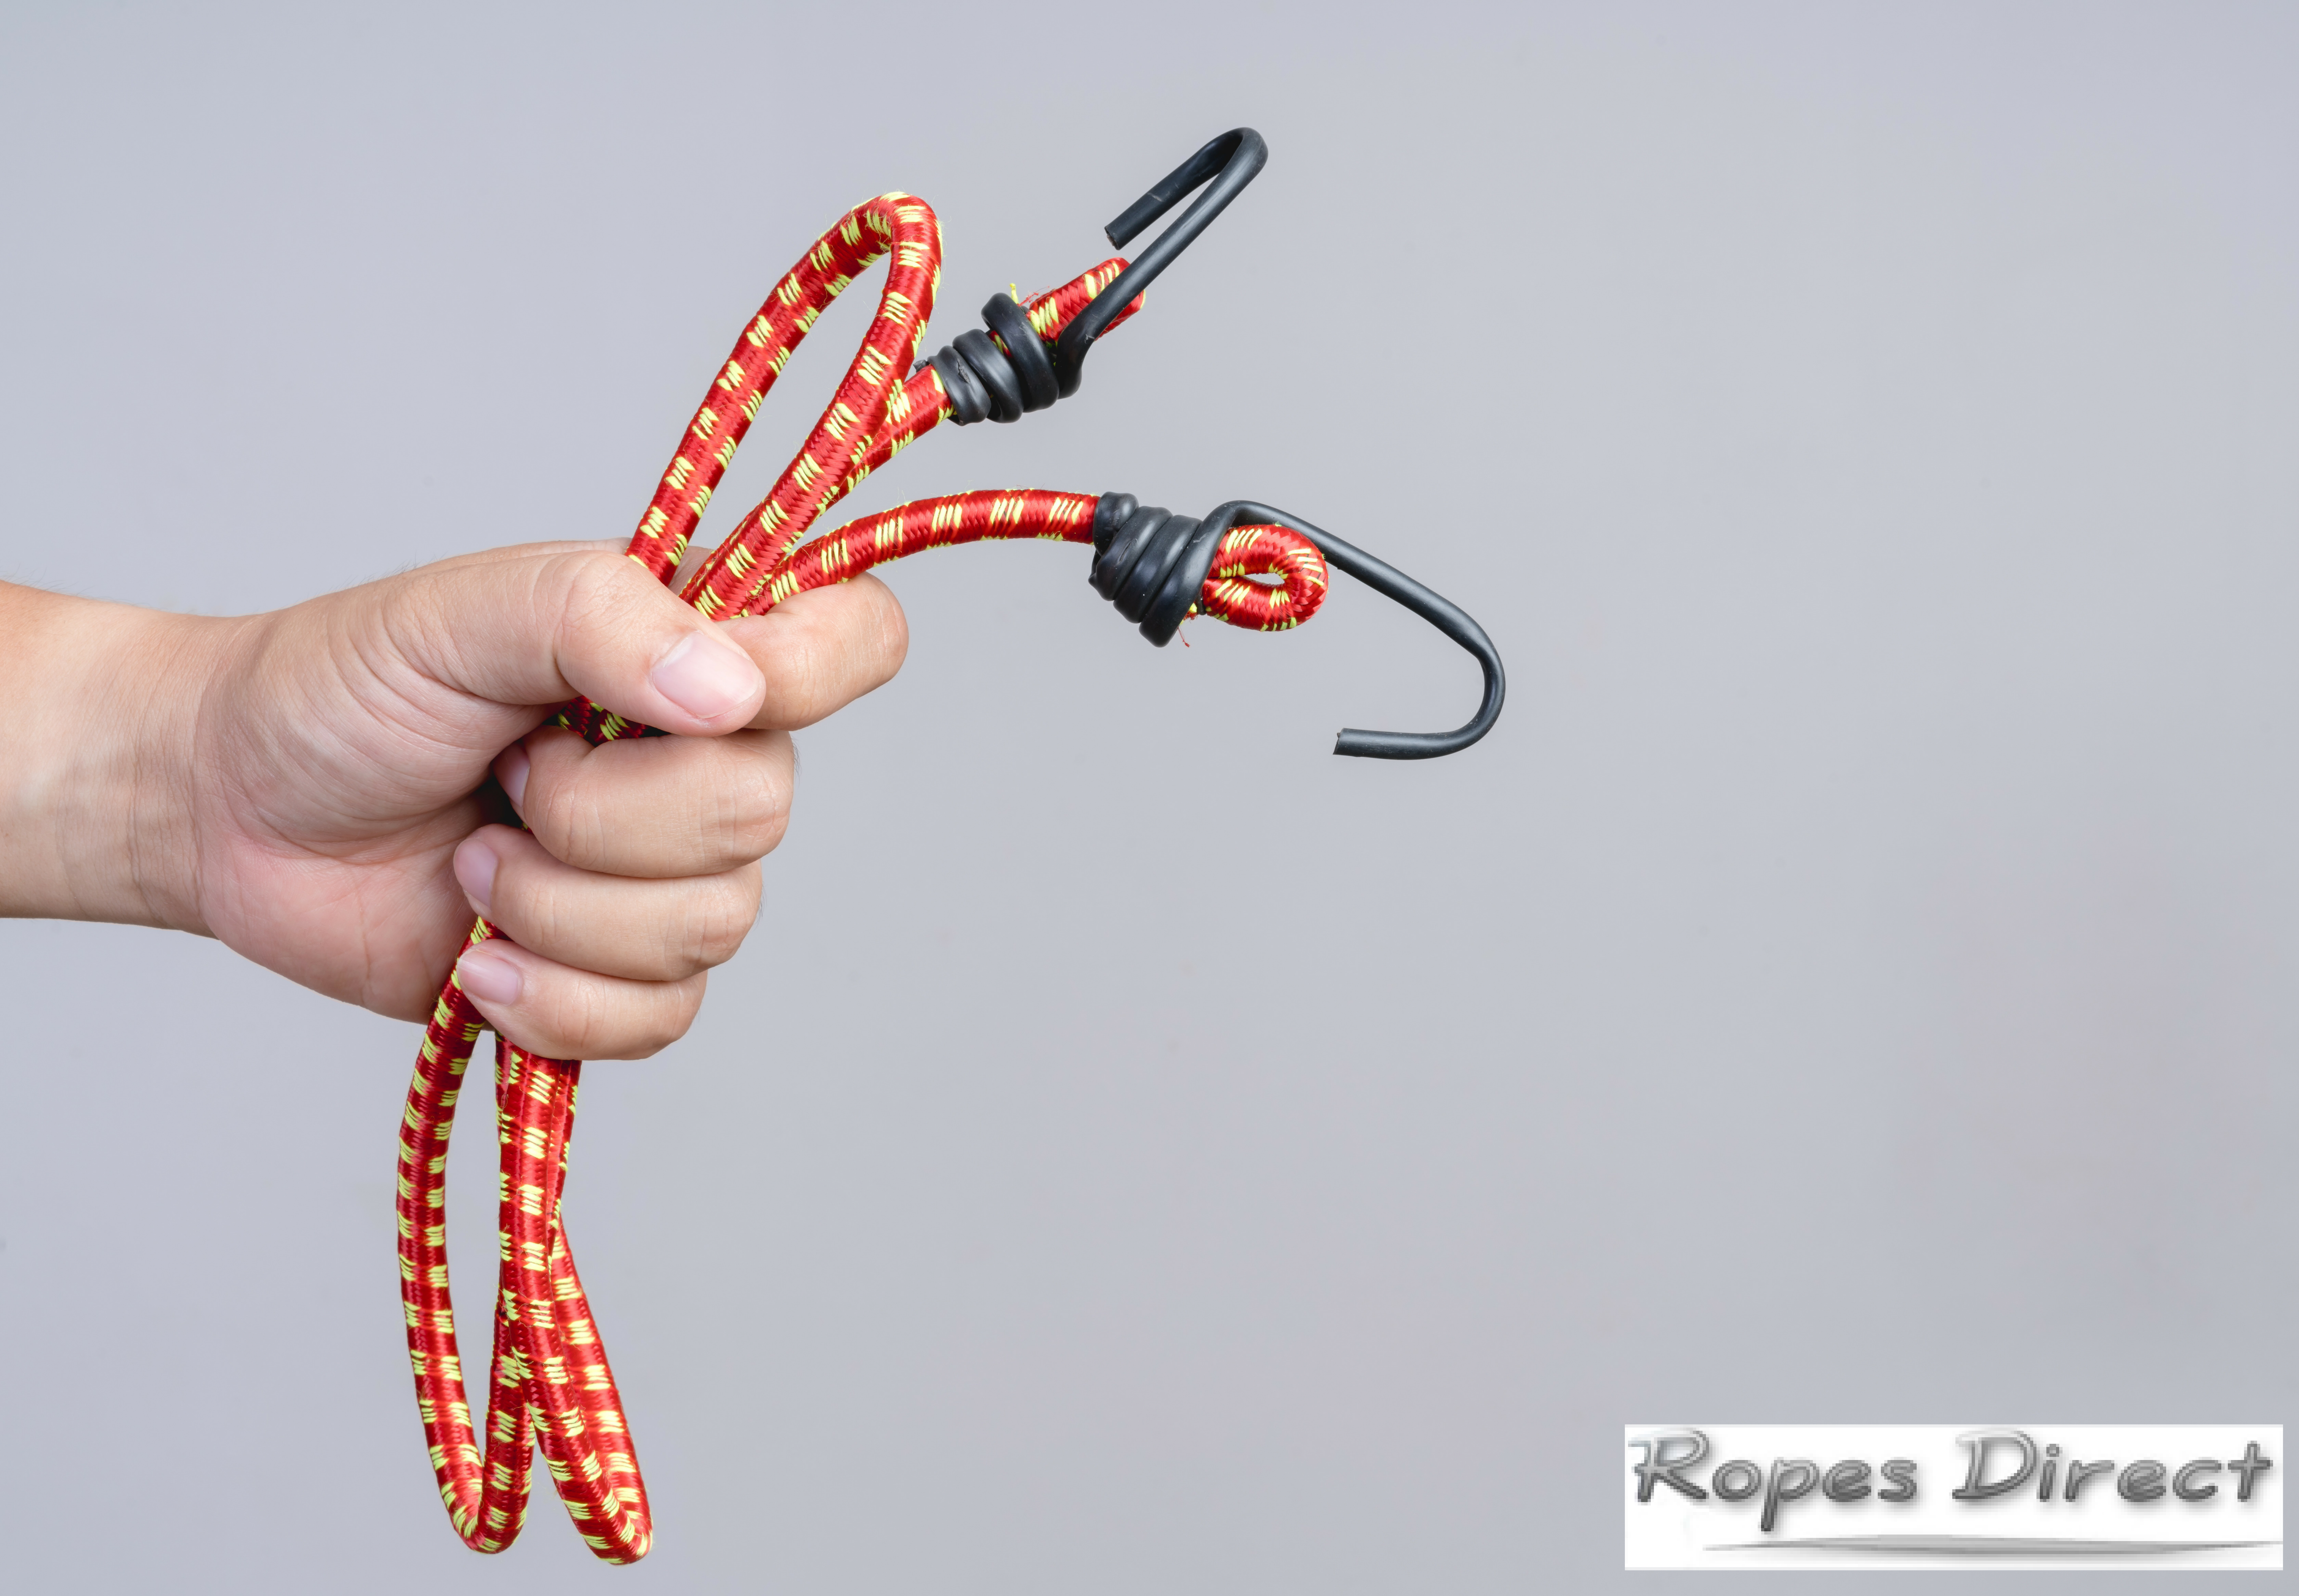 5 ways to ensure safety when using a bungee cord - Ropes Direct Ropes Direct